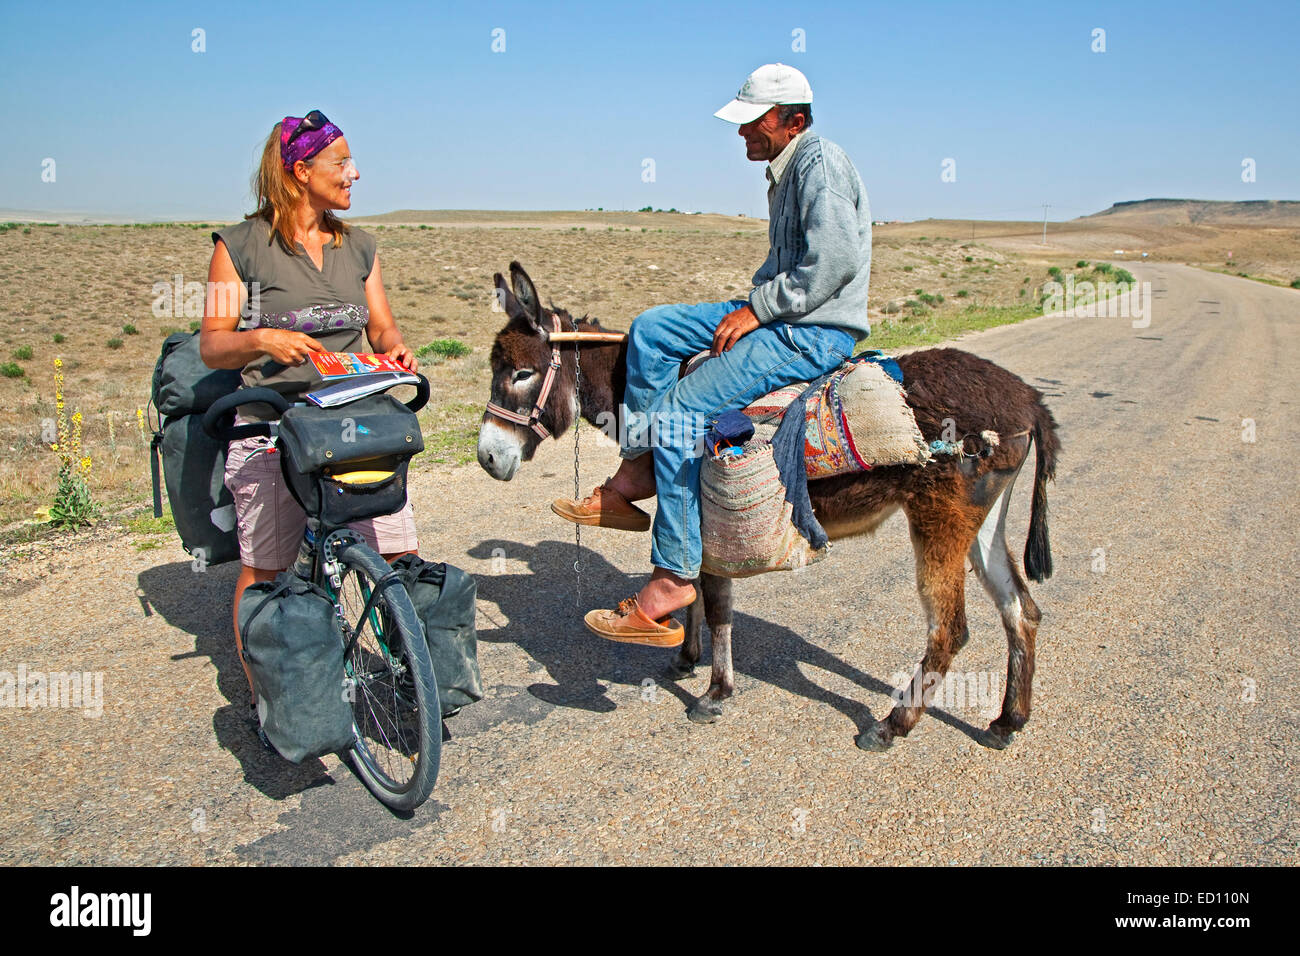 Female cyclist on touring bike asking directions to a Turkish man on donkey in Western Turkey Stock Photo